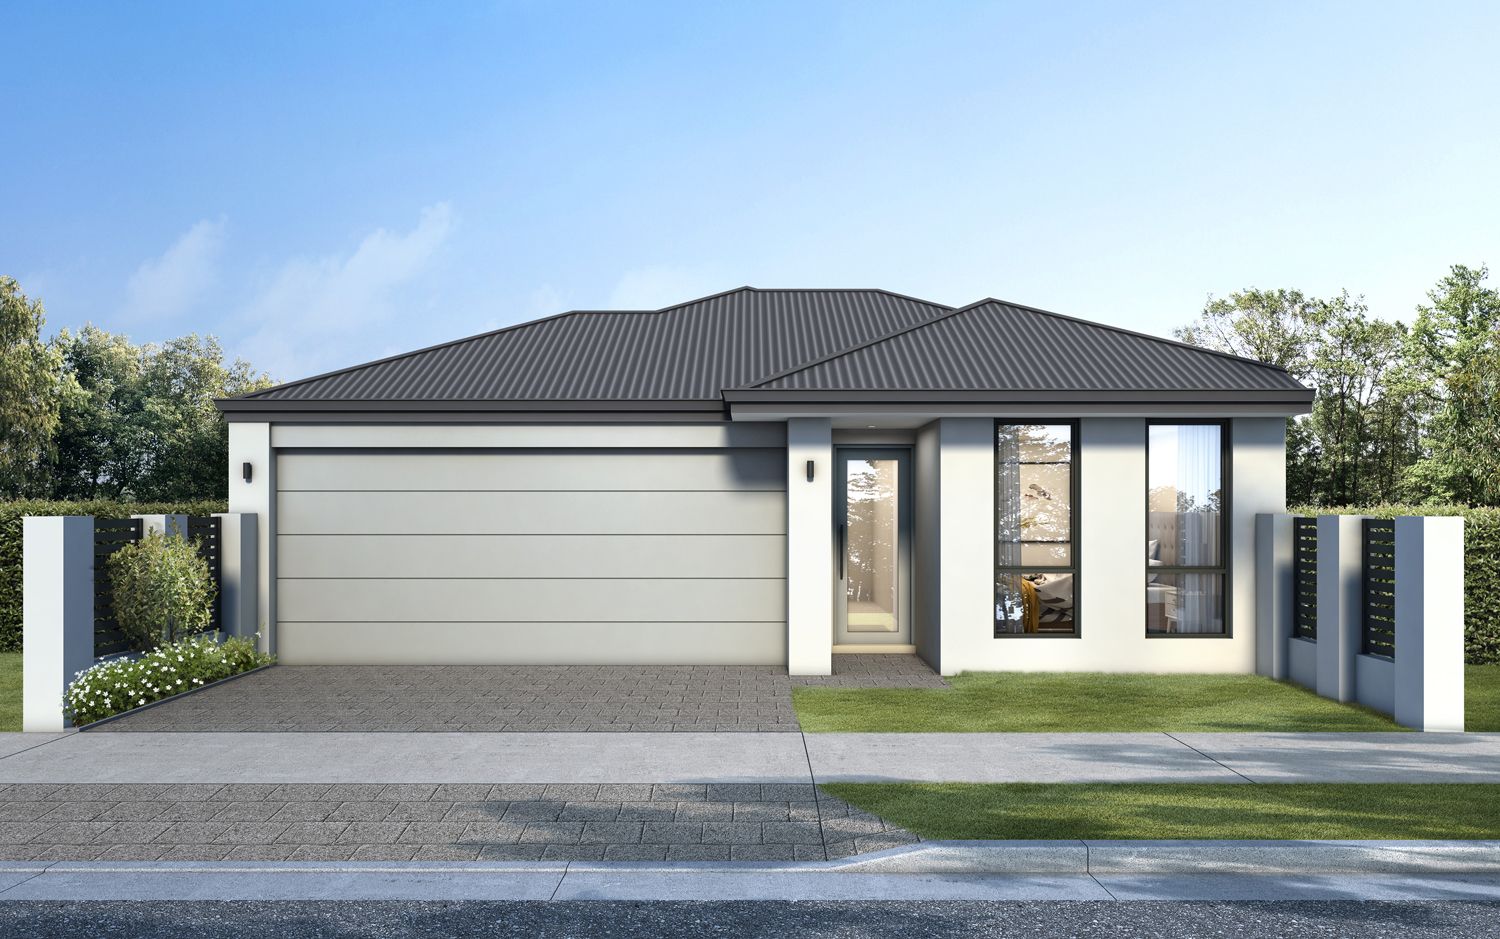 4 bedrooms New House & Land in  SINAGRA WA, 6065